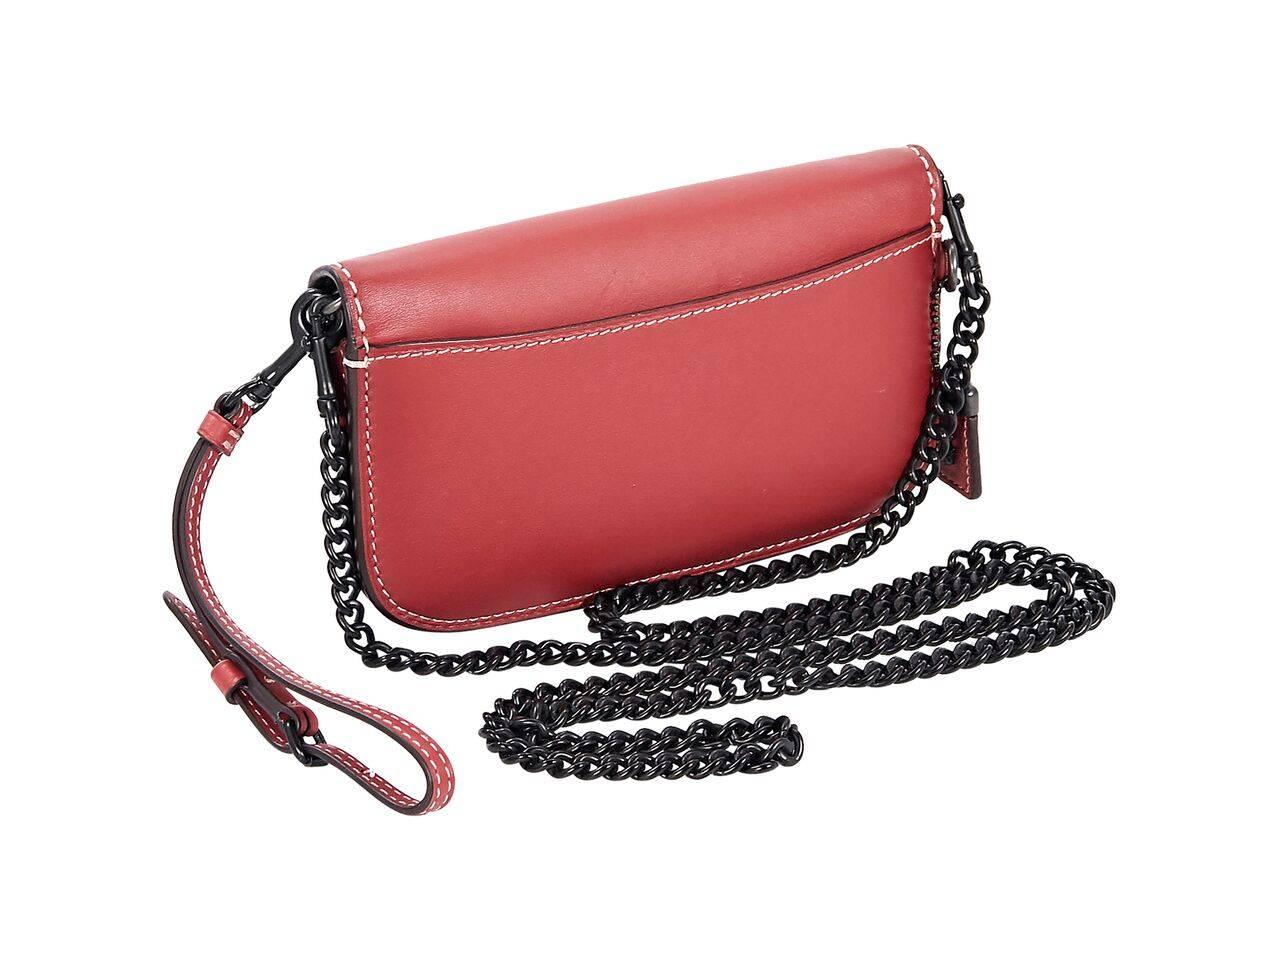 Product details:  Red leather crossbody bag by Coach.  Detachable wristlet strap.  Detachable chain crossbody strap.  Front flap.  Snap closure.  Leather interior with inner center zip pouch and credit card slots.  Black hardware.  7.25